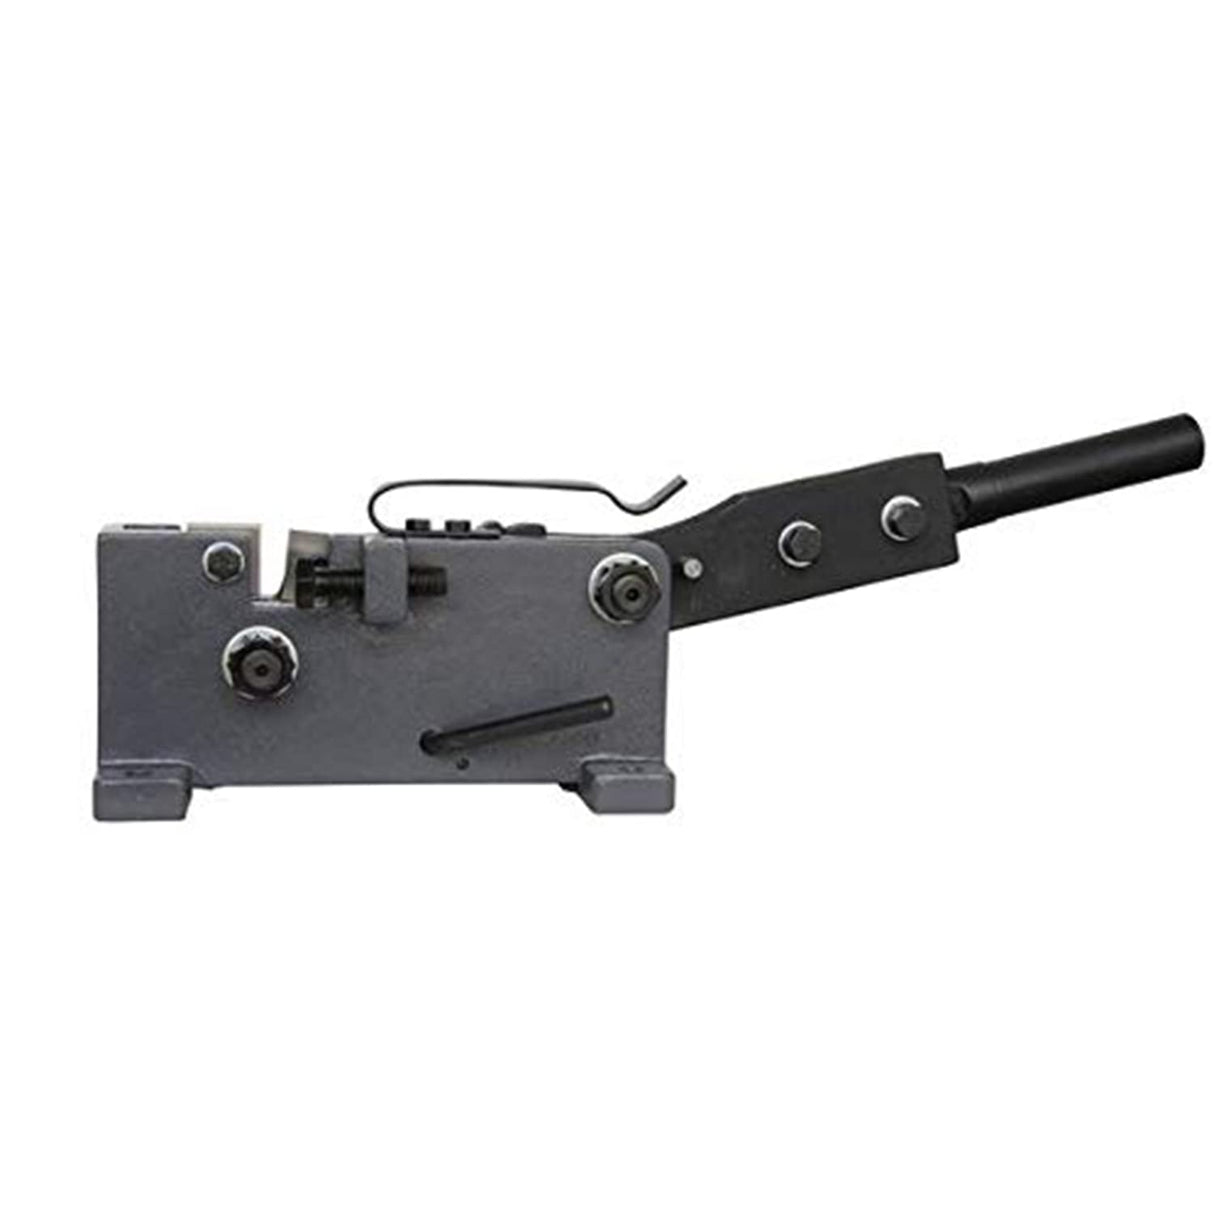 KANG Industrial MS-28 28mm Metal Manual Shears, Solid Construction and Versatility, Rebar, Rod Steel Cutter, Flat Bar Steel, Round Metal Cutter